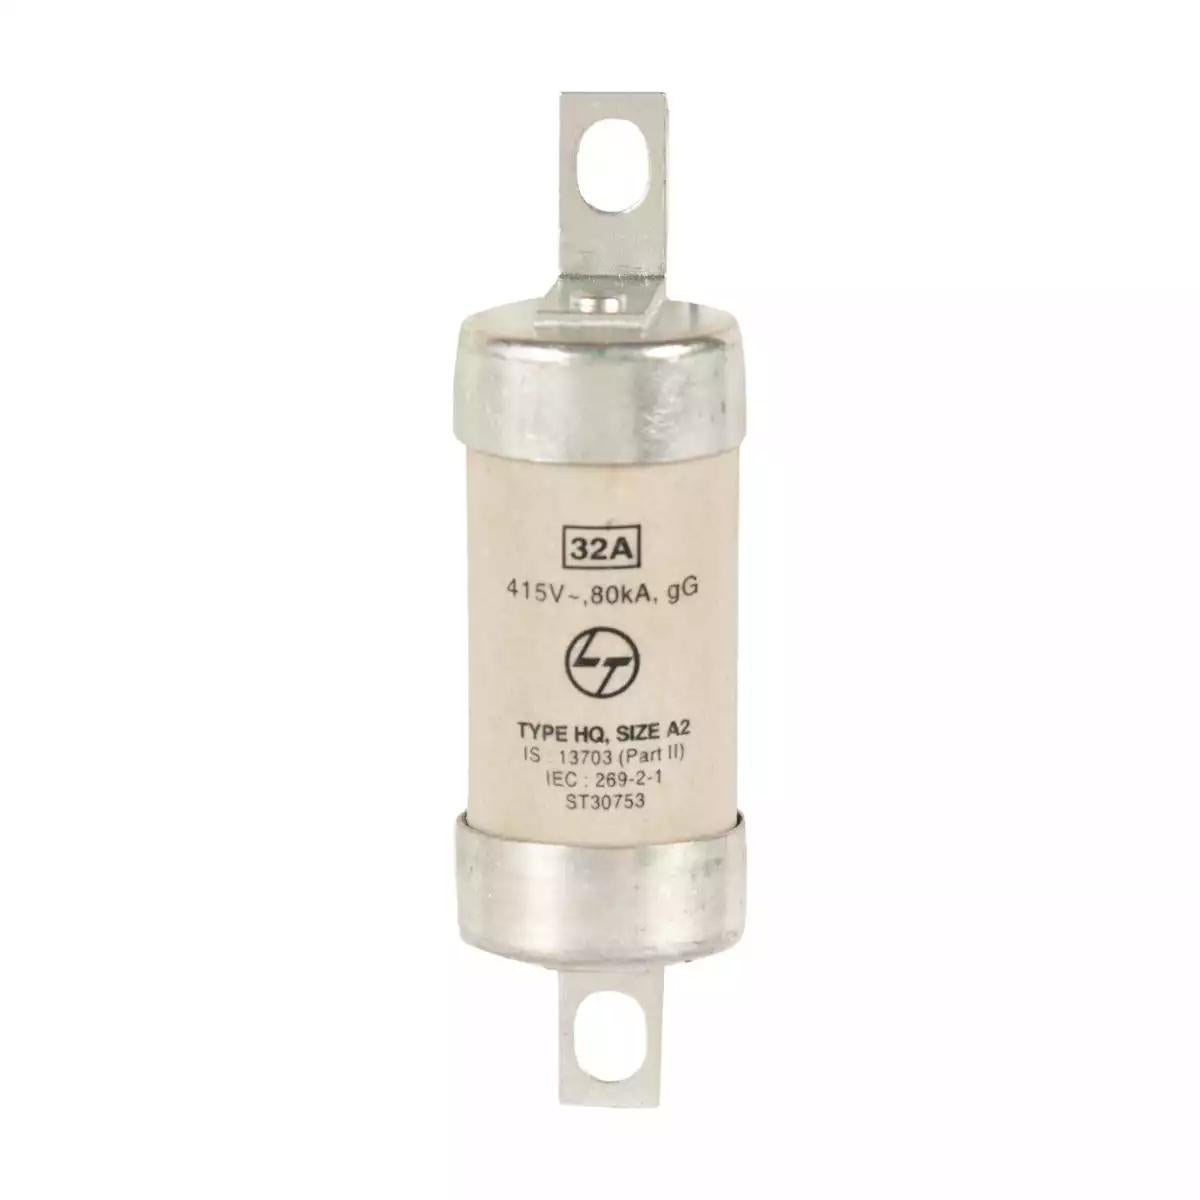 HQ Bolted HRC fuse 10A 415V AC Size A2